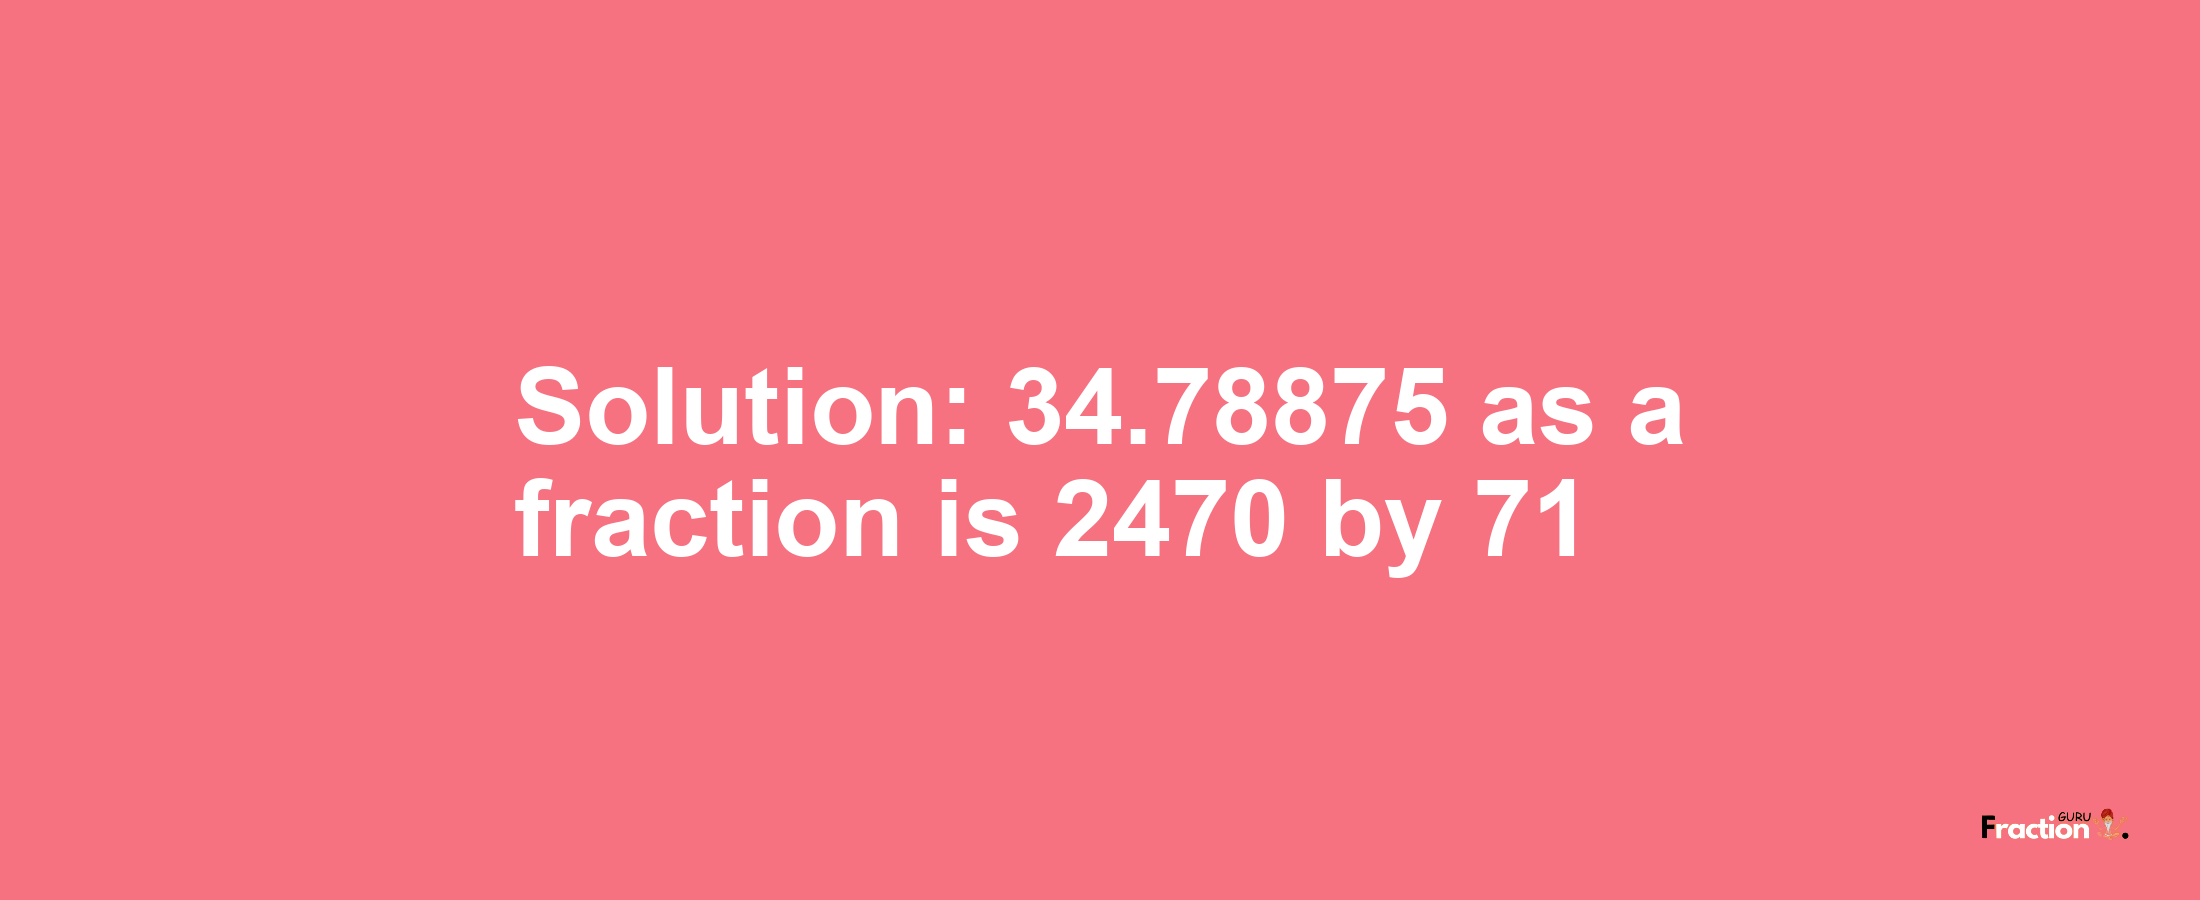 Solution:34.78875 as a fraction is 2470/71